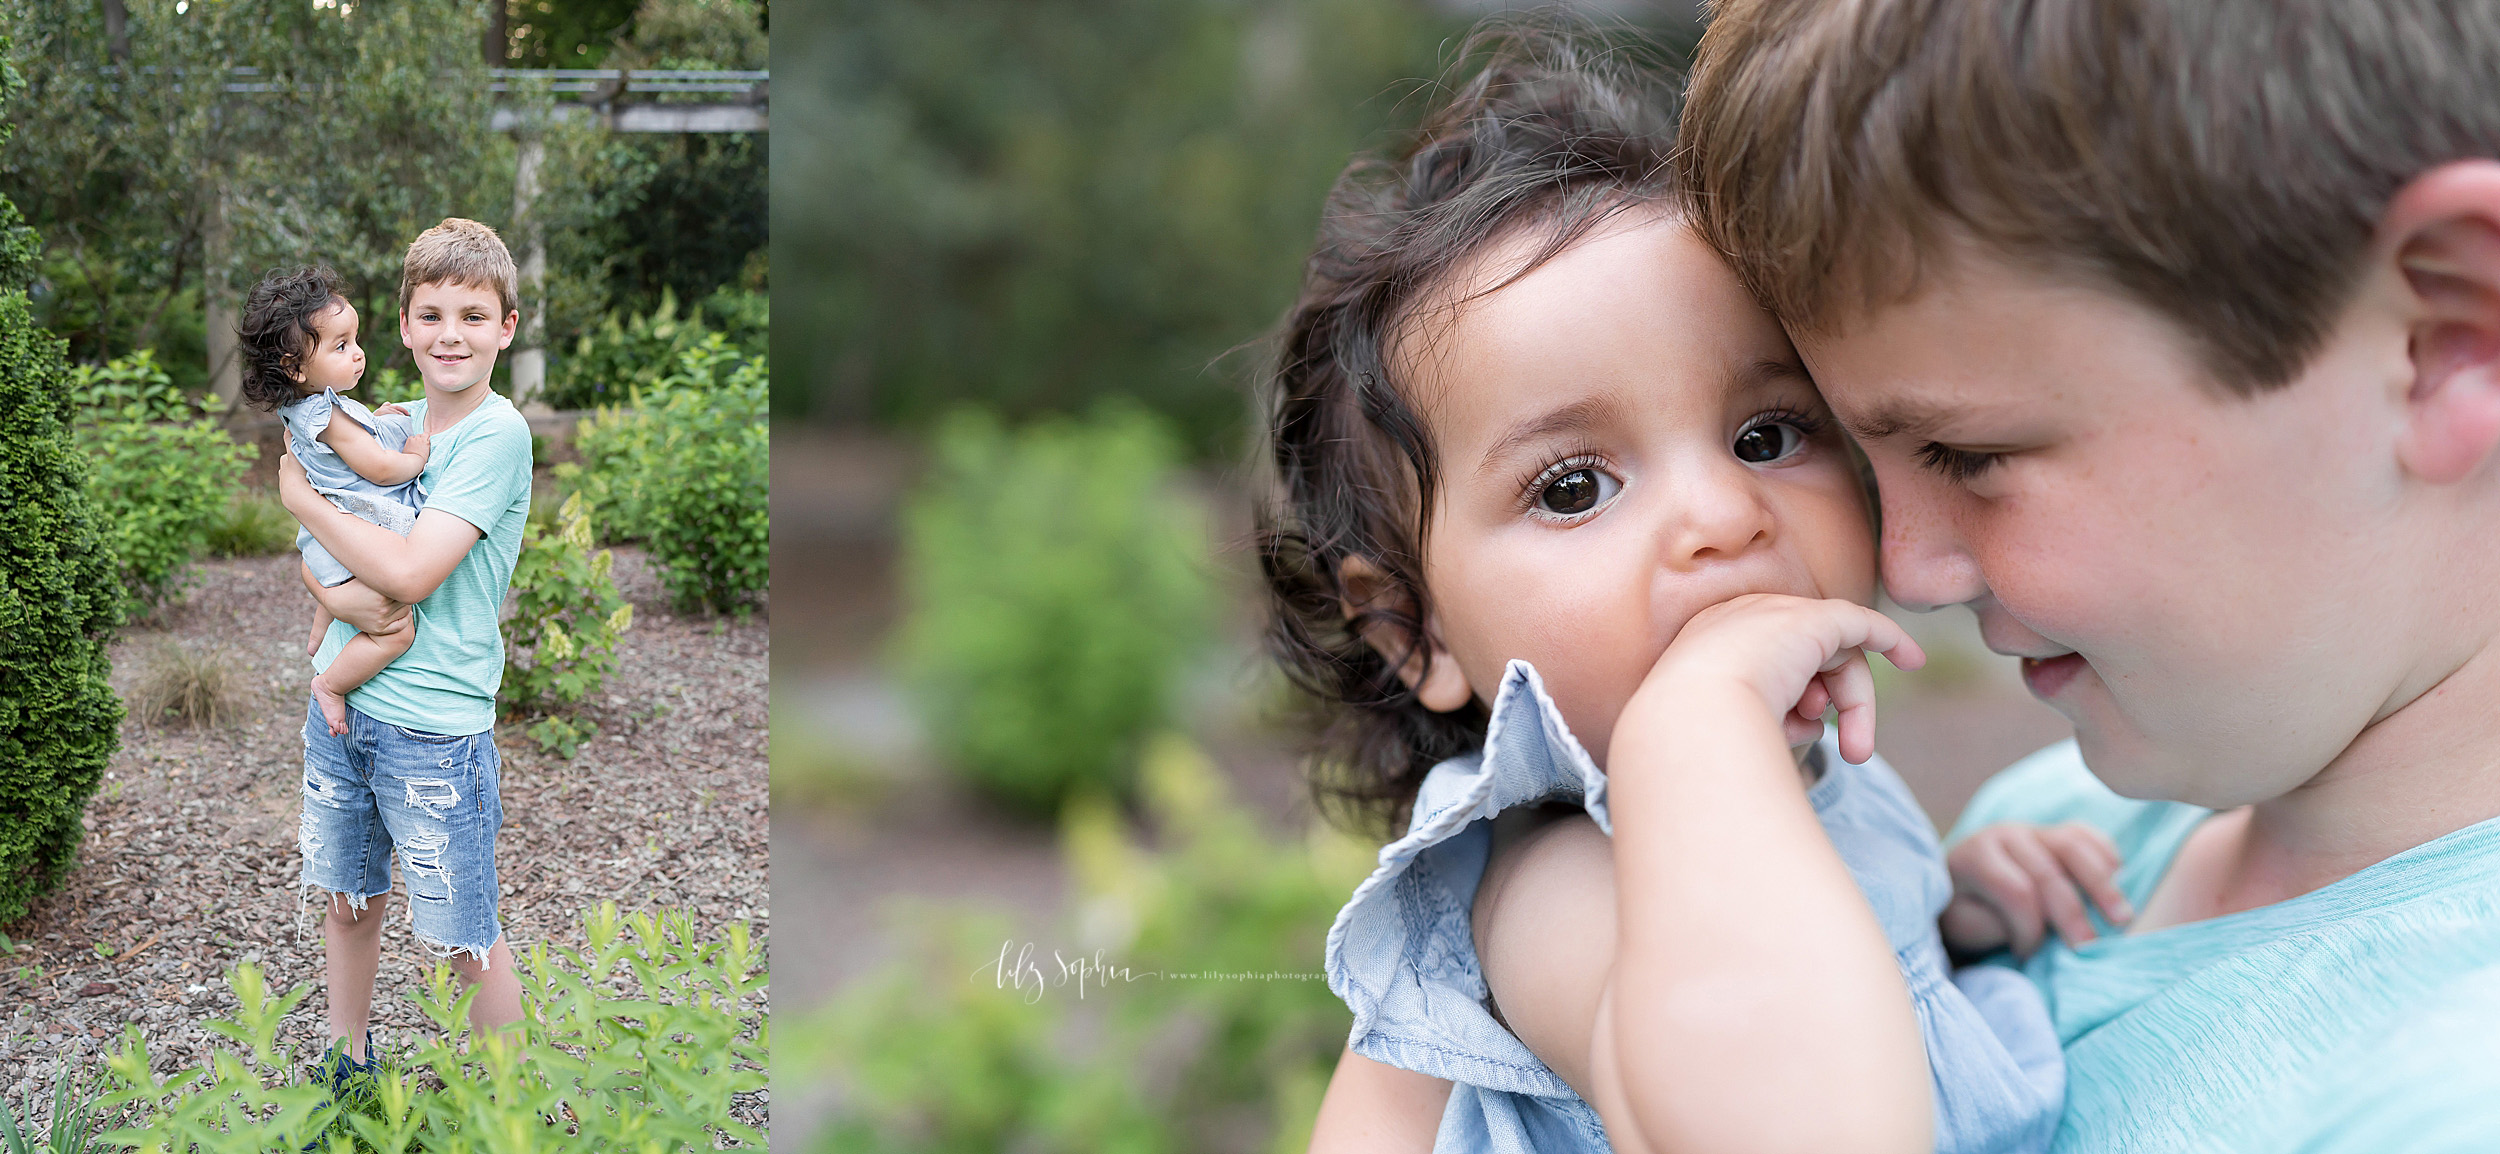  Split image photo of siblings taken by Lily Sophia Photography in an Atlanta garden. The older brother is holding his baby sister as she looks at him. In the second close-up shot, the older brother has his forehead against his baby sister as she put